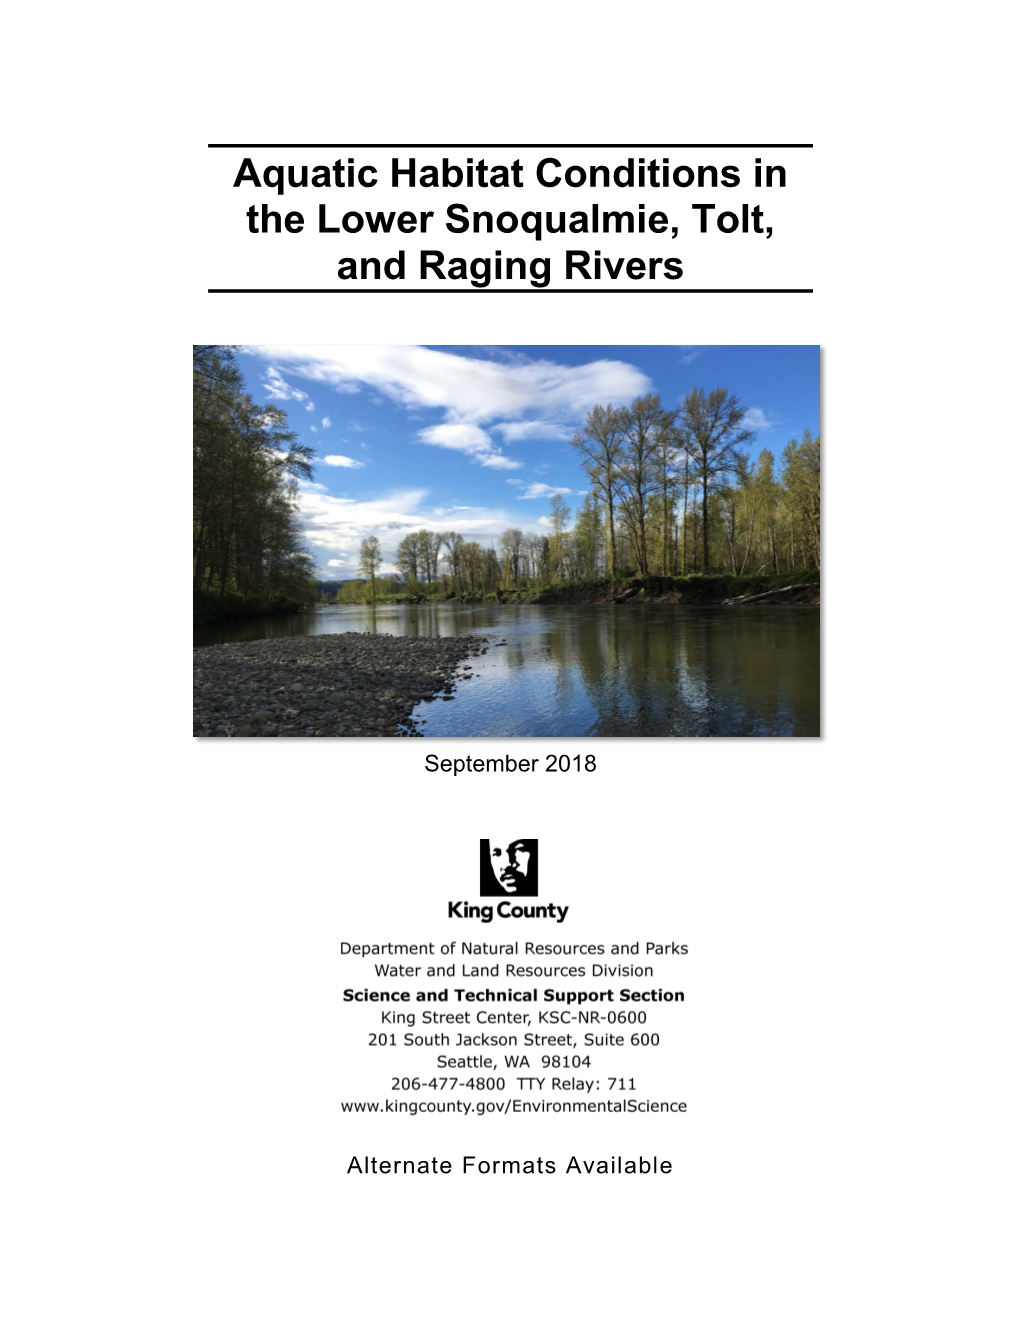 Aquatic Habitat Conditions in the Lower Snoqualmie, Tolt, and Raging Rivers